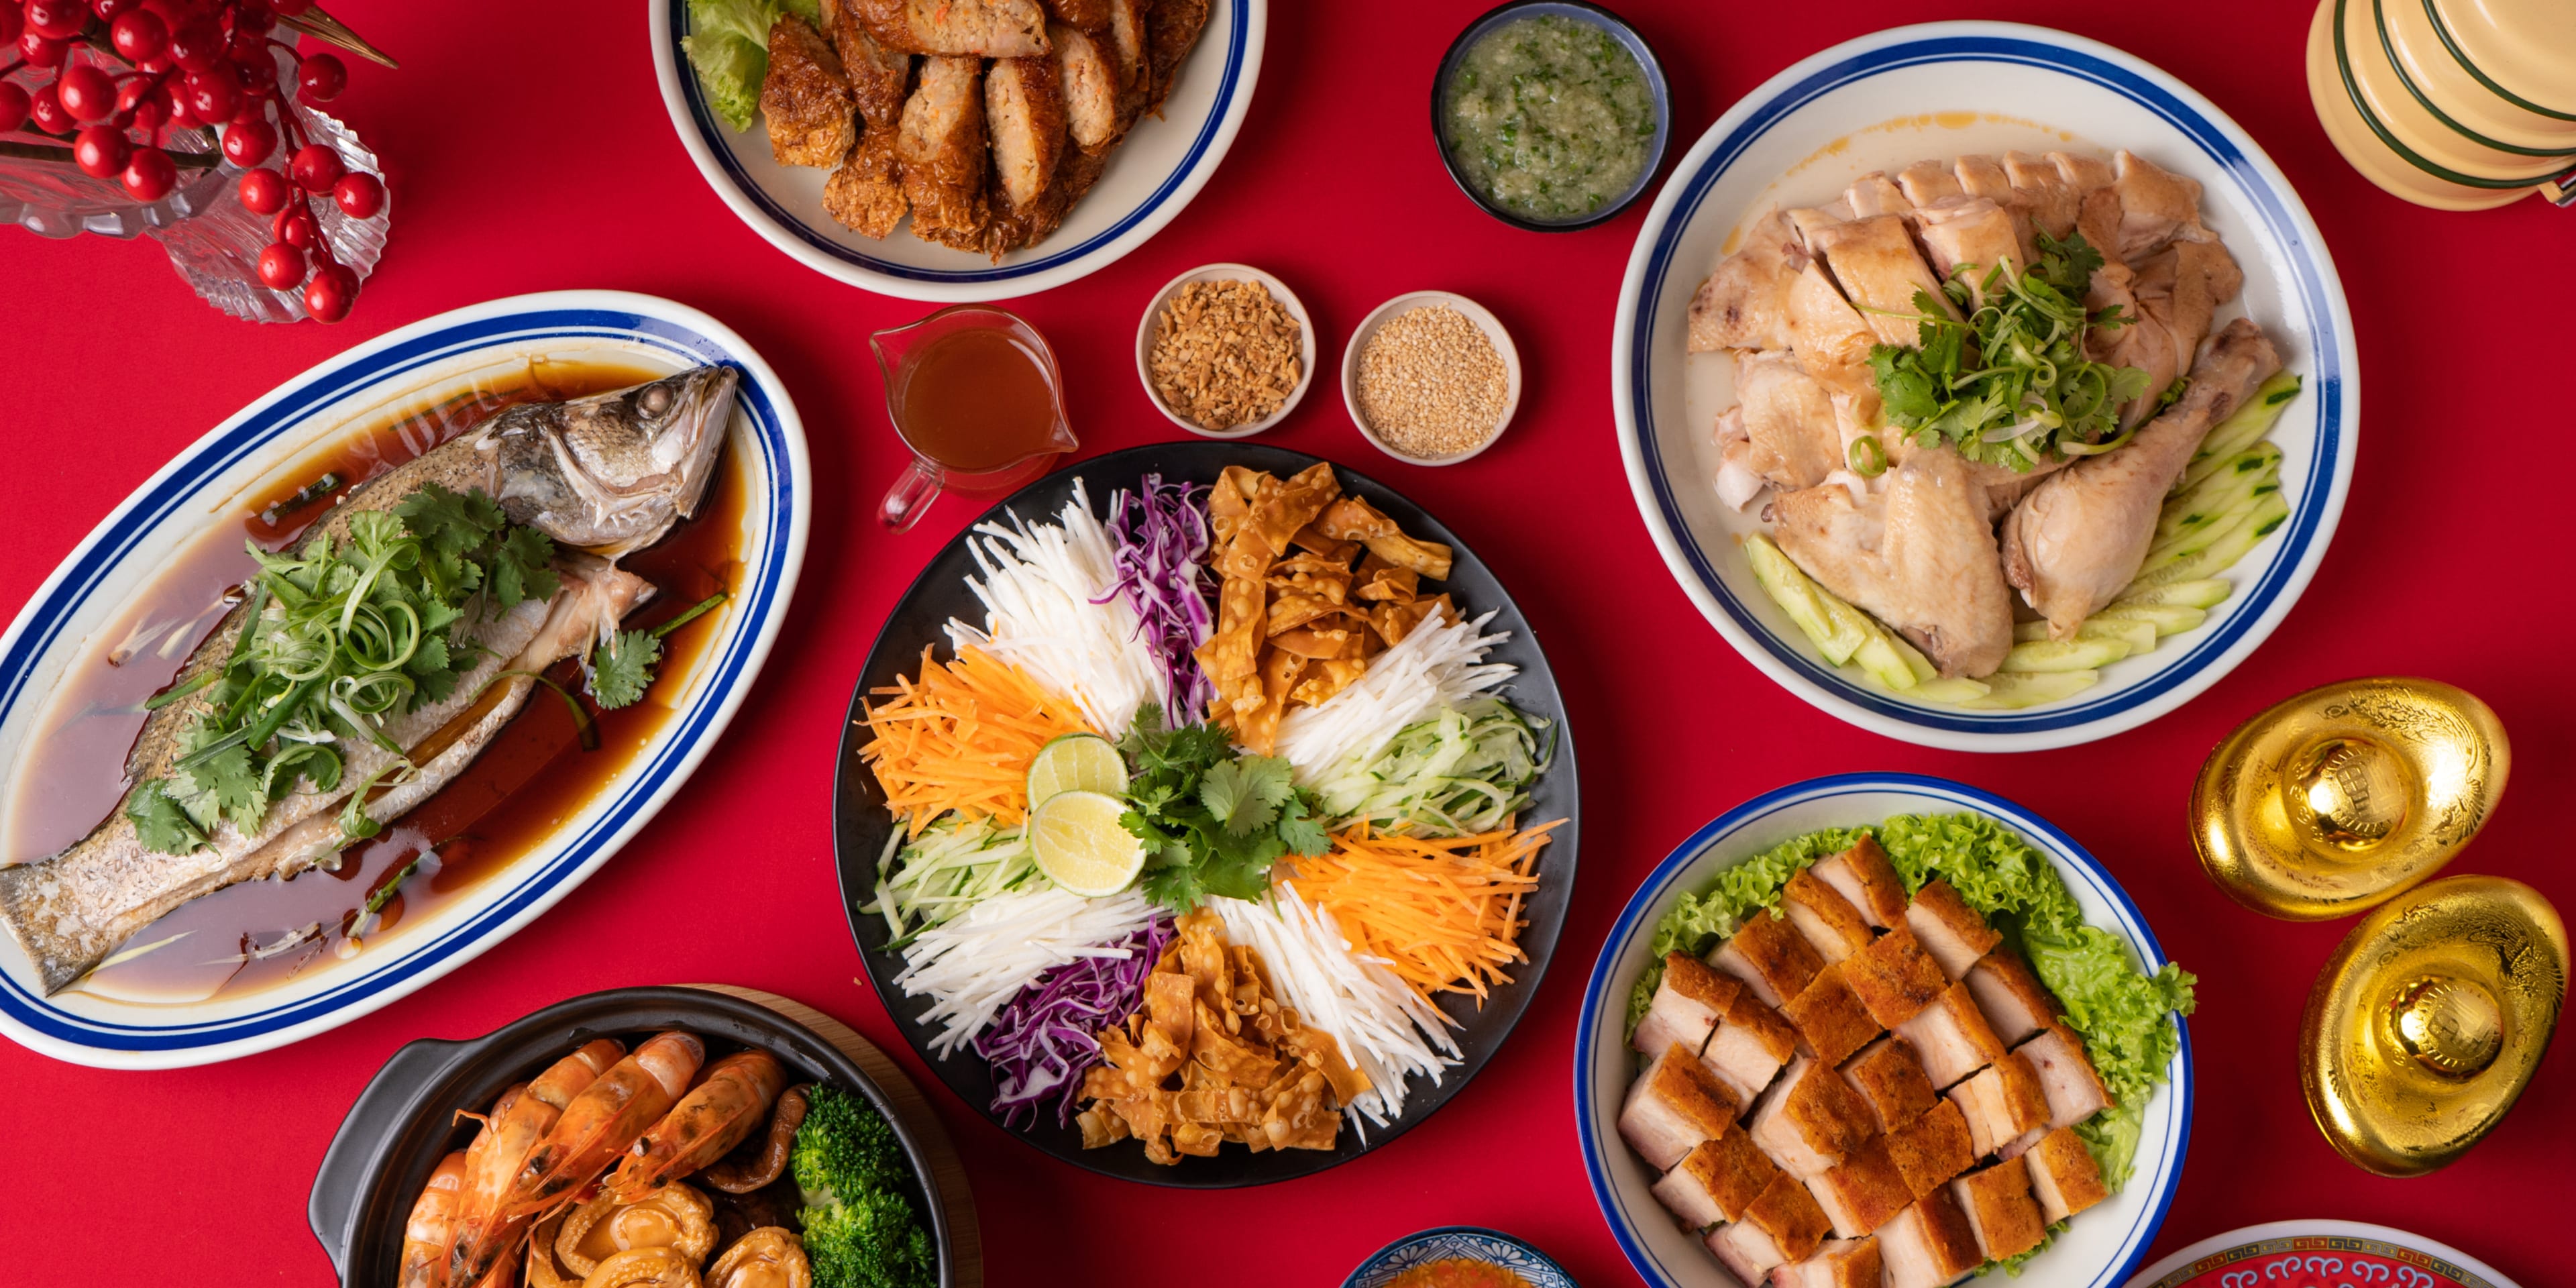 Spread of several Lunar New Year dishes and condiments